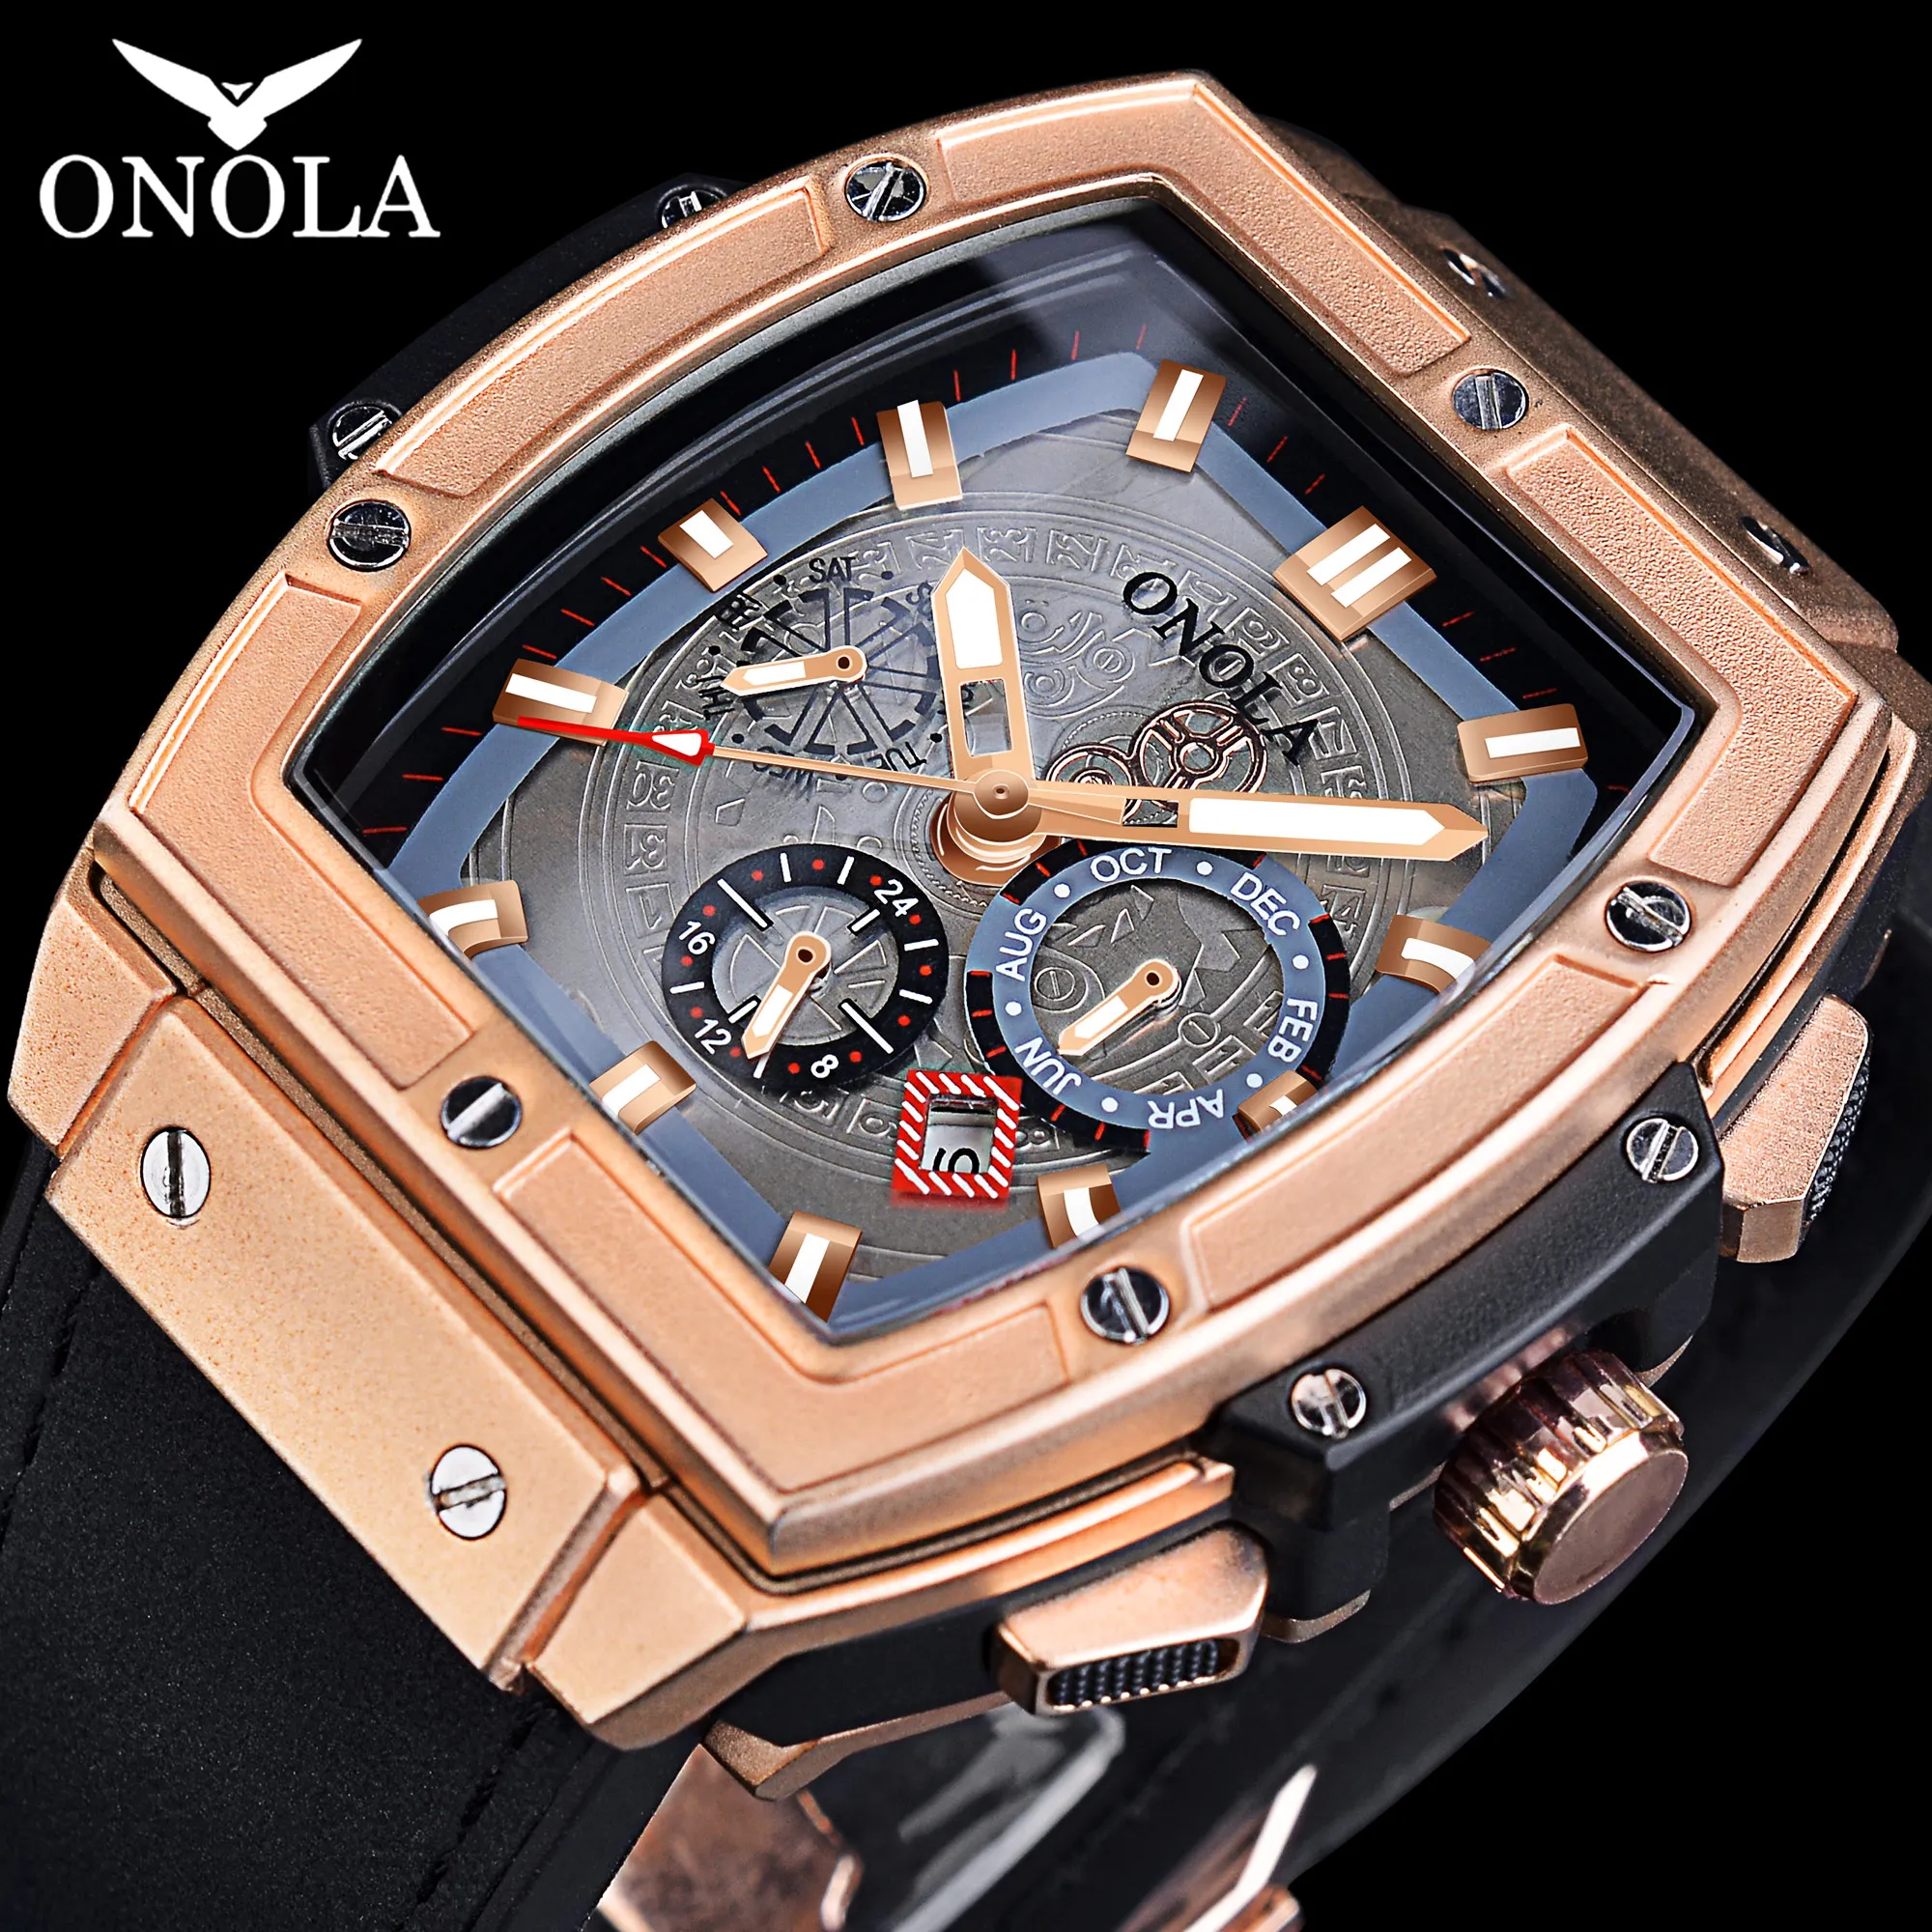 

ONOLA Classic Automatic Mechanical Watches Waterproof Men Outdoor Watches Multifunction Military Wristwatch With Calendar Reloj